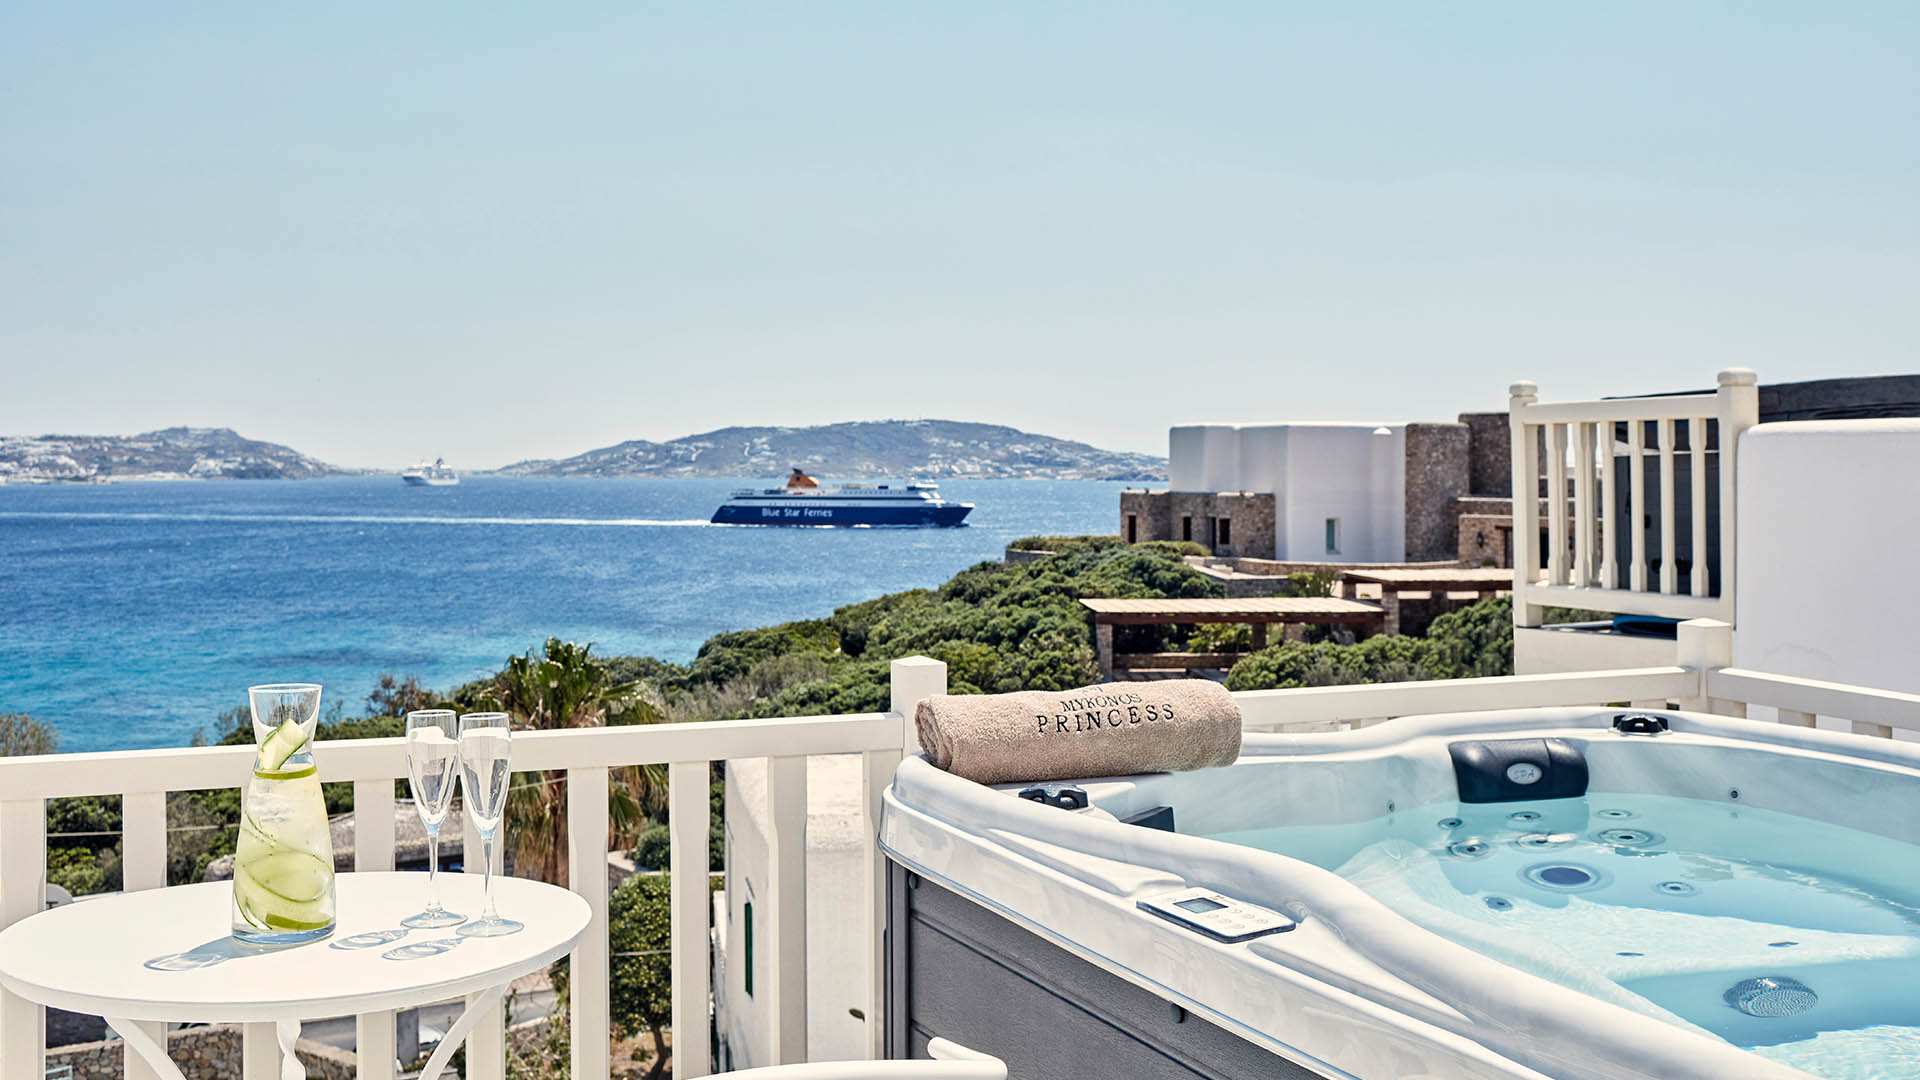 Blissful balcony retreat at Mykonos Princess Hotel: Mykonos suite boasts a private jacuzzi overlooking the Aegean Sea, complete with a refreshing lemon water setup.